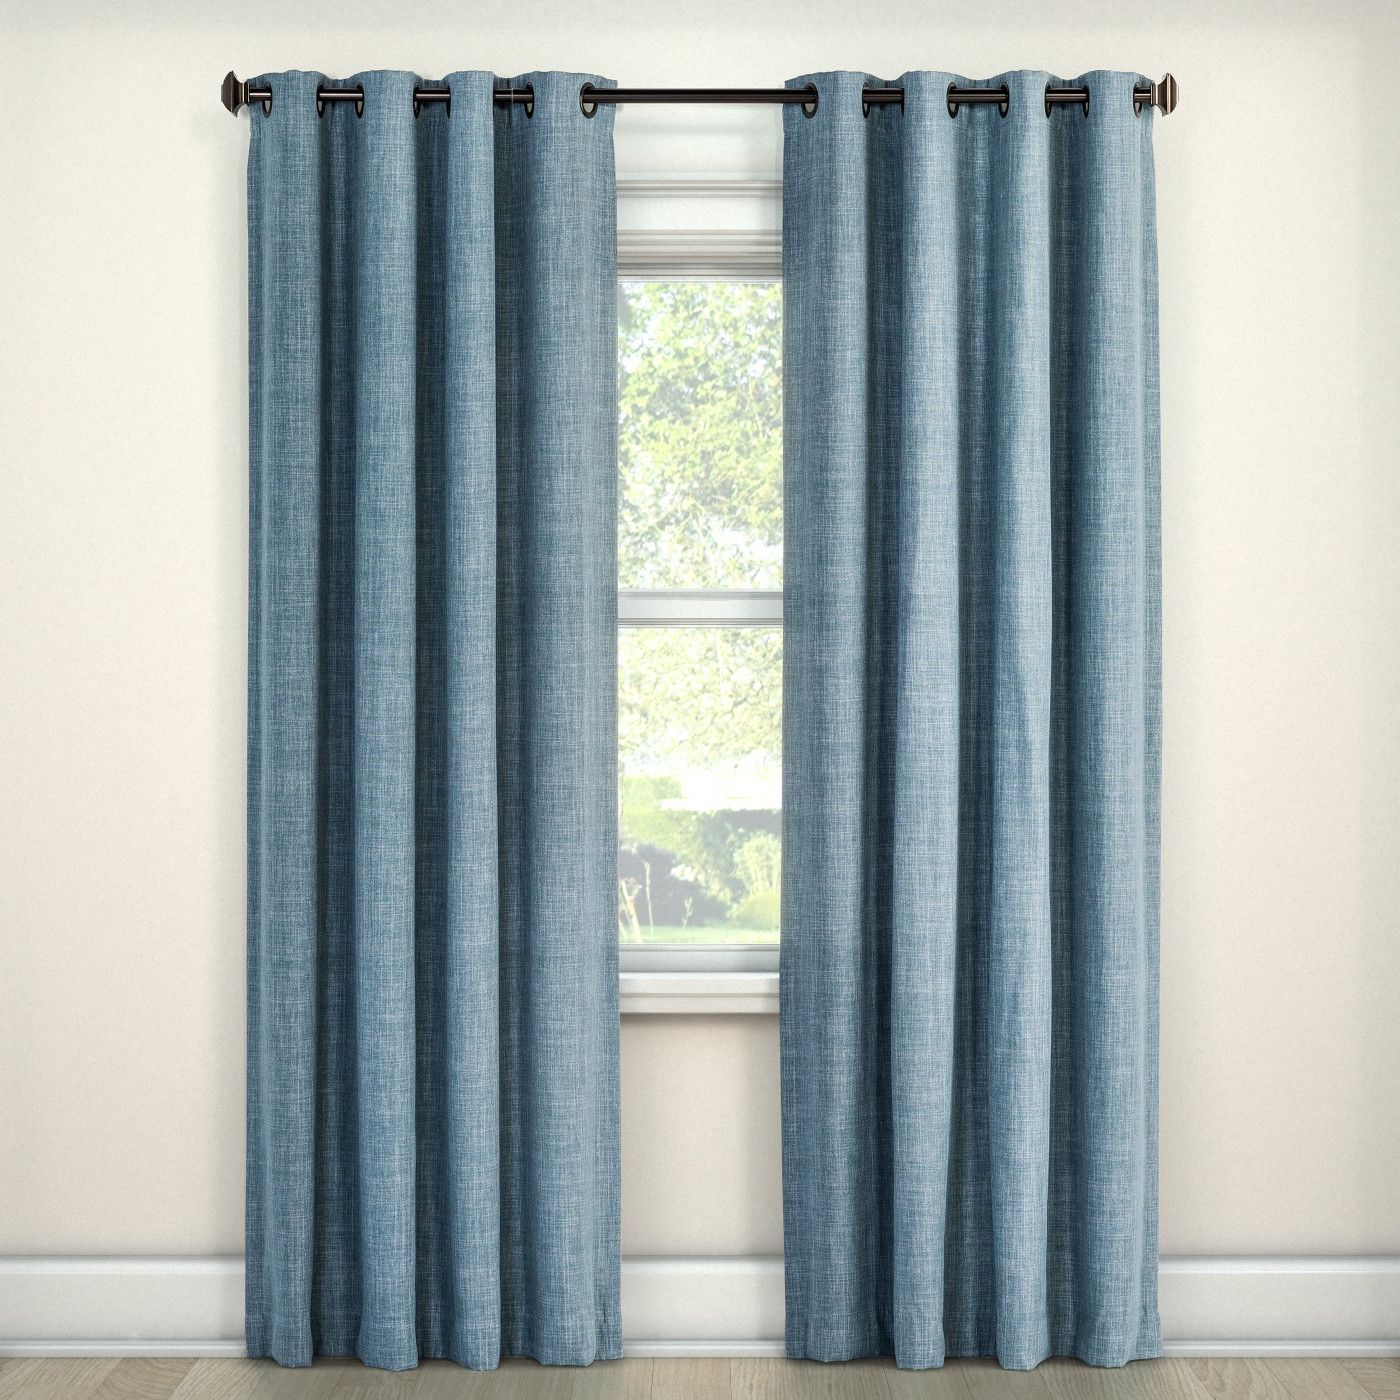 Eclipse Trevi Blackout Grommet Window Curtain Panels Intended For Famous Eclipse Rowland Light Blocking Curtain Panel – 52"x84", Blue (View 20 of 20)